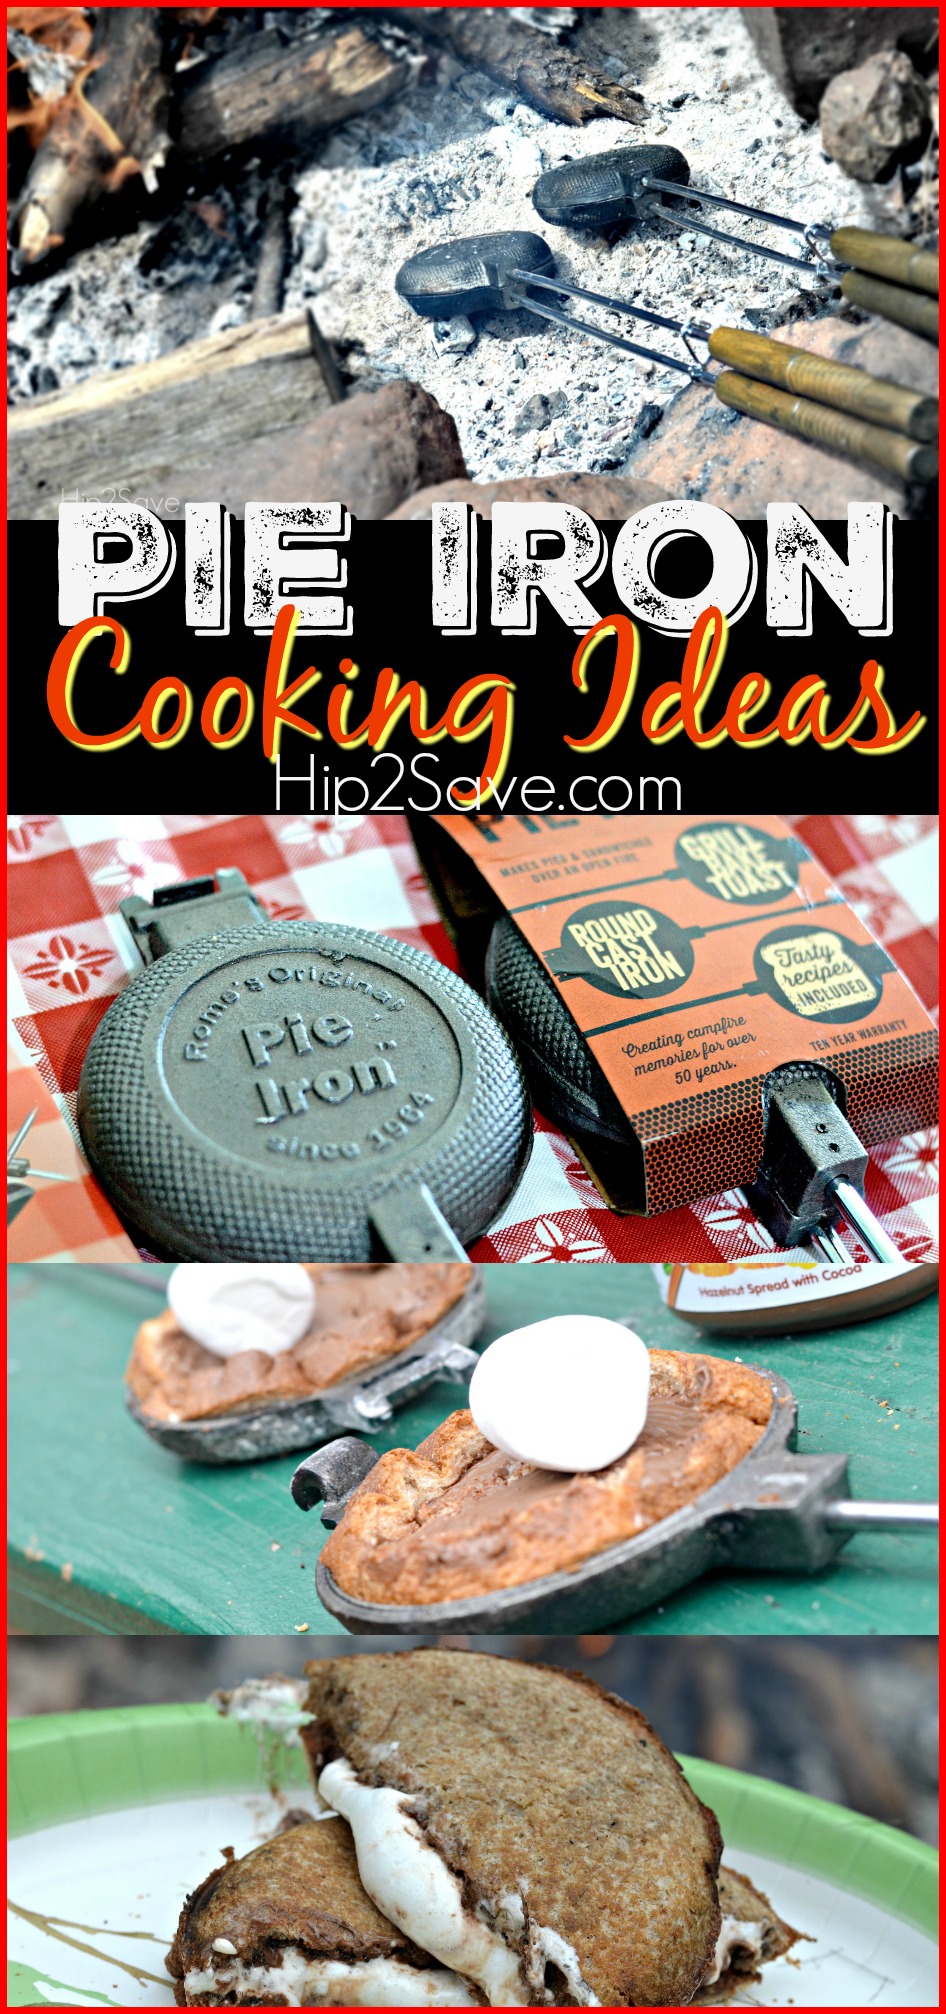 Camp Chef Square Pie Iron: Perfectly Grilled Delights for Outdoor Cooking!  , SSPI 